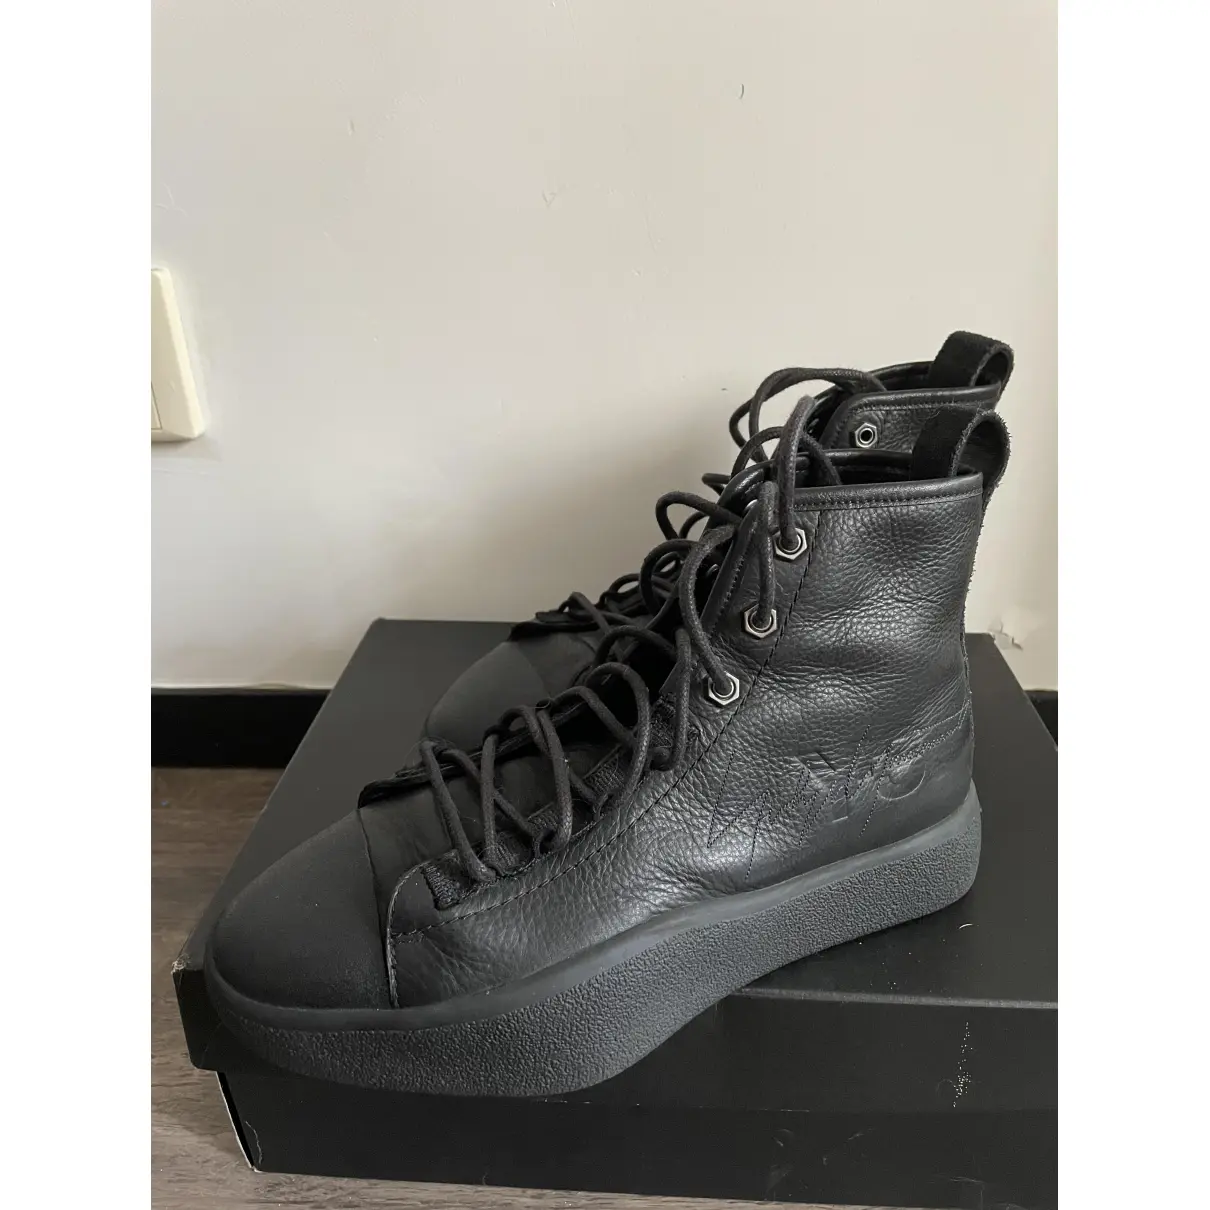 Buy Y-3 Leather boots online